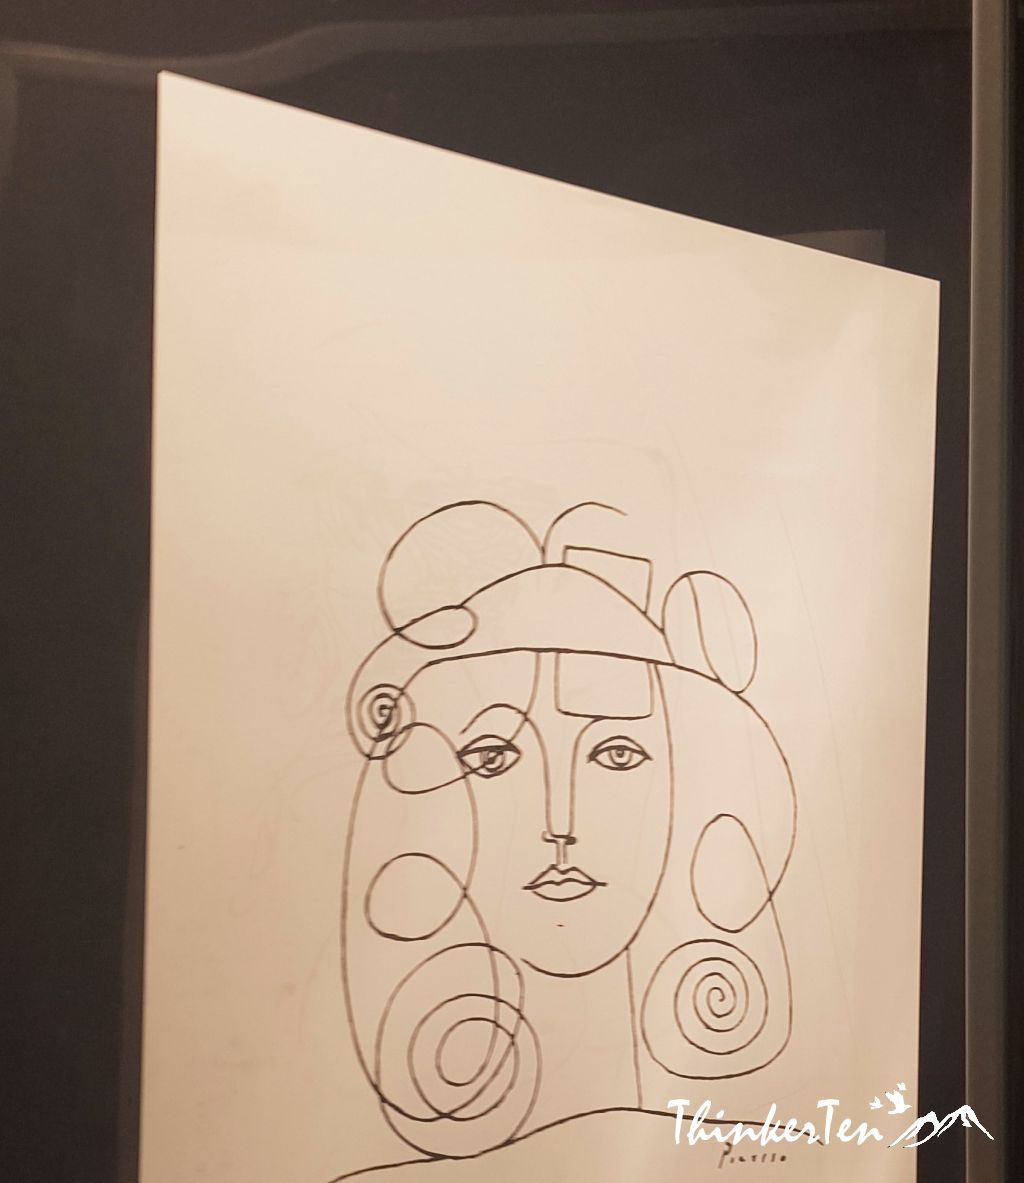 What you would see in Picasso Museum in Barcelona?